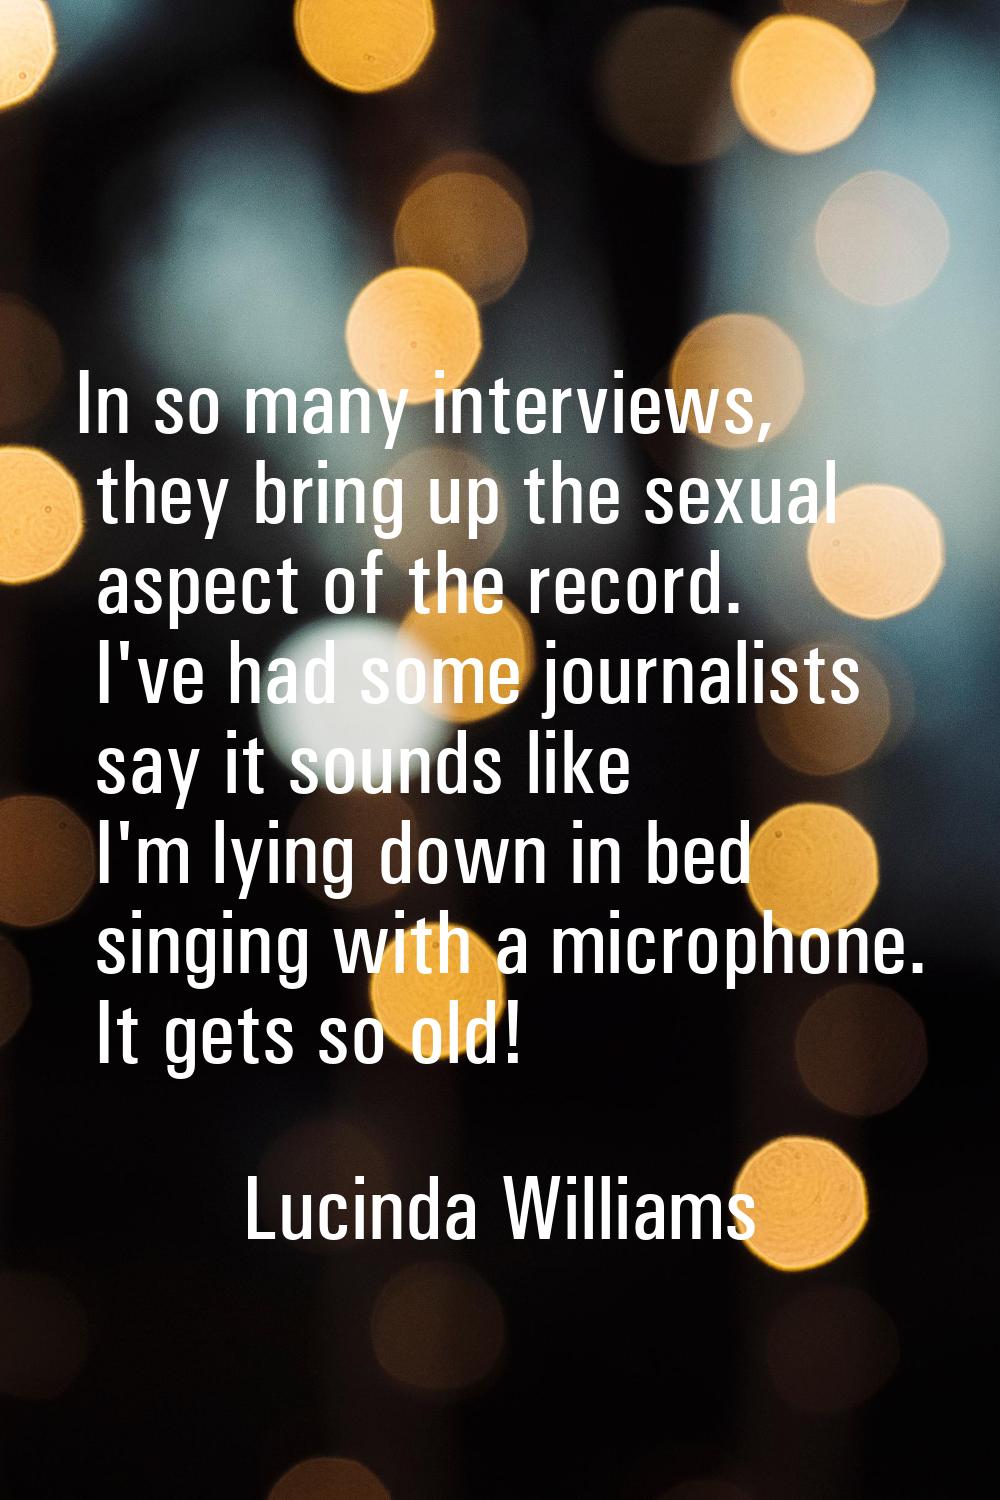 In so many interviews, they bring up the sexual aspect of the record. I've had some journalists say